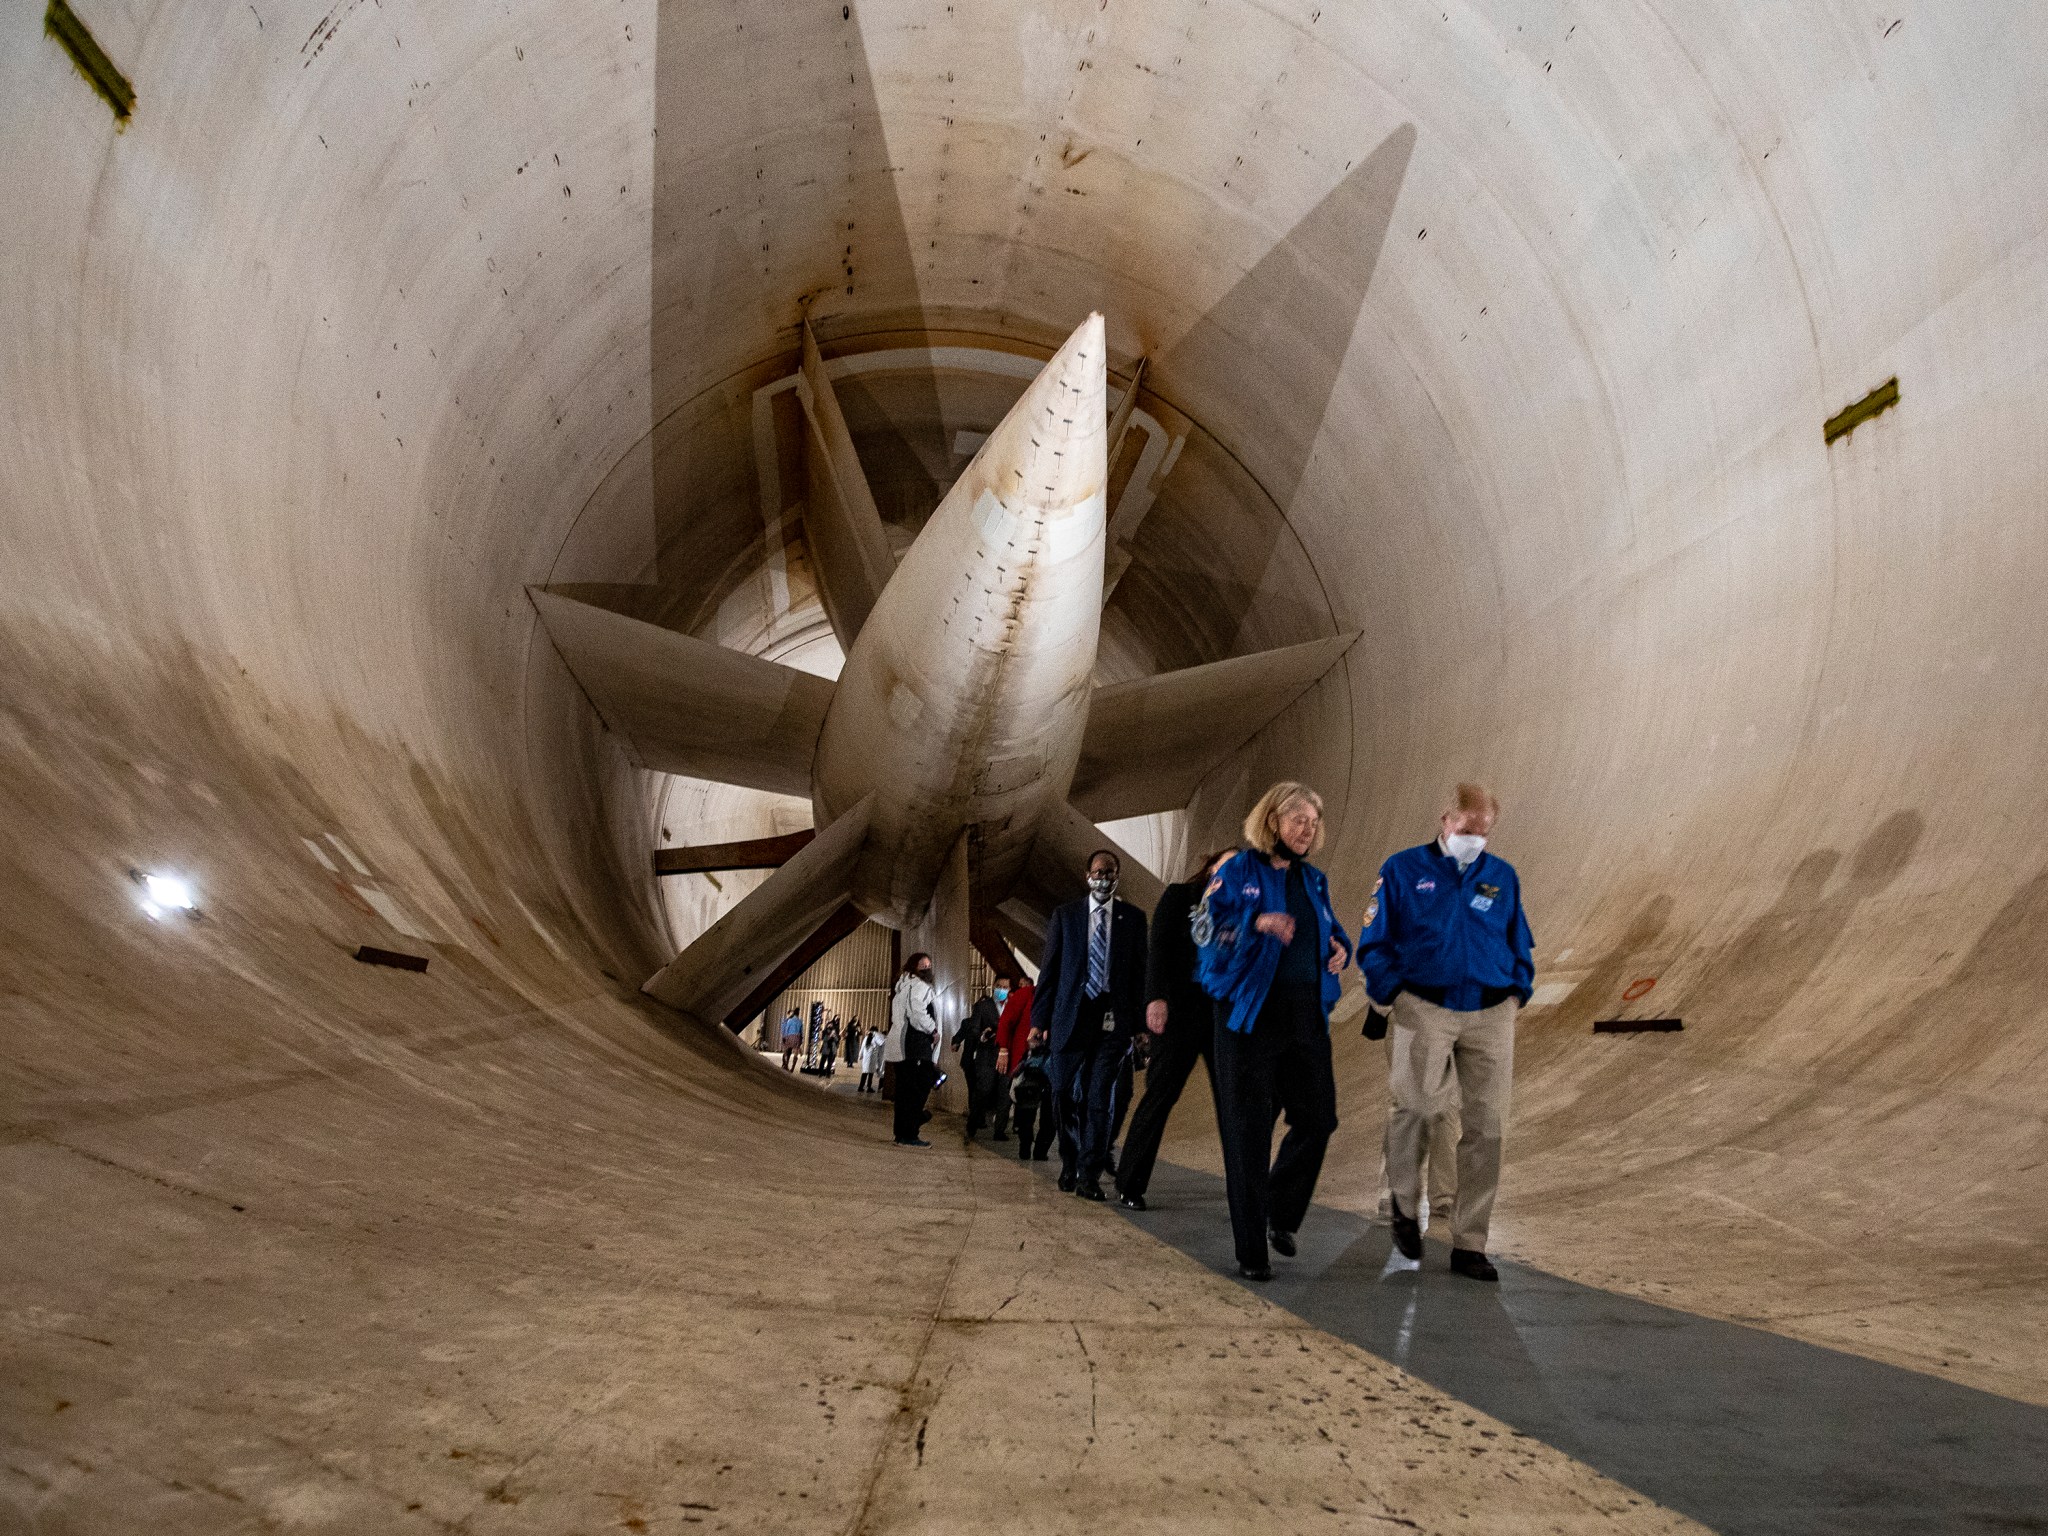 NASA Administrator Bill Nelson, right, and NASA Deputy Administrator Pam Melroy, center, tour inside NASA Langley's 14- by 22-Foot Subsonic Tunnel Feb. 24.